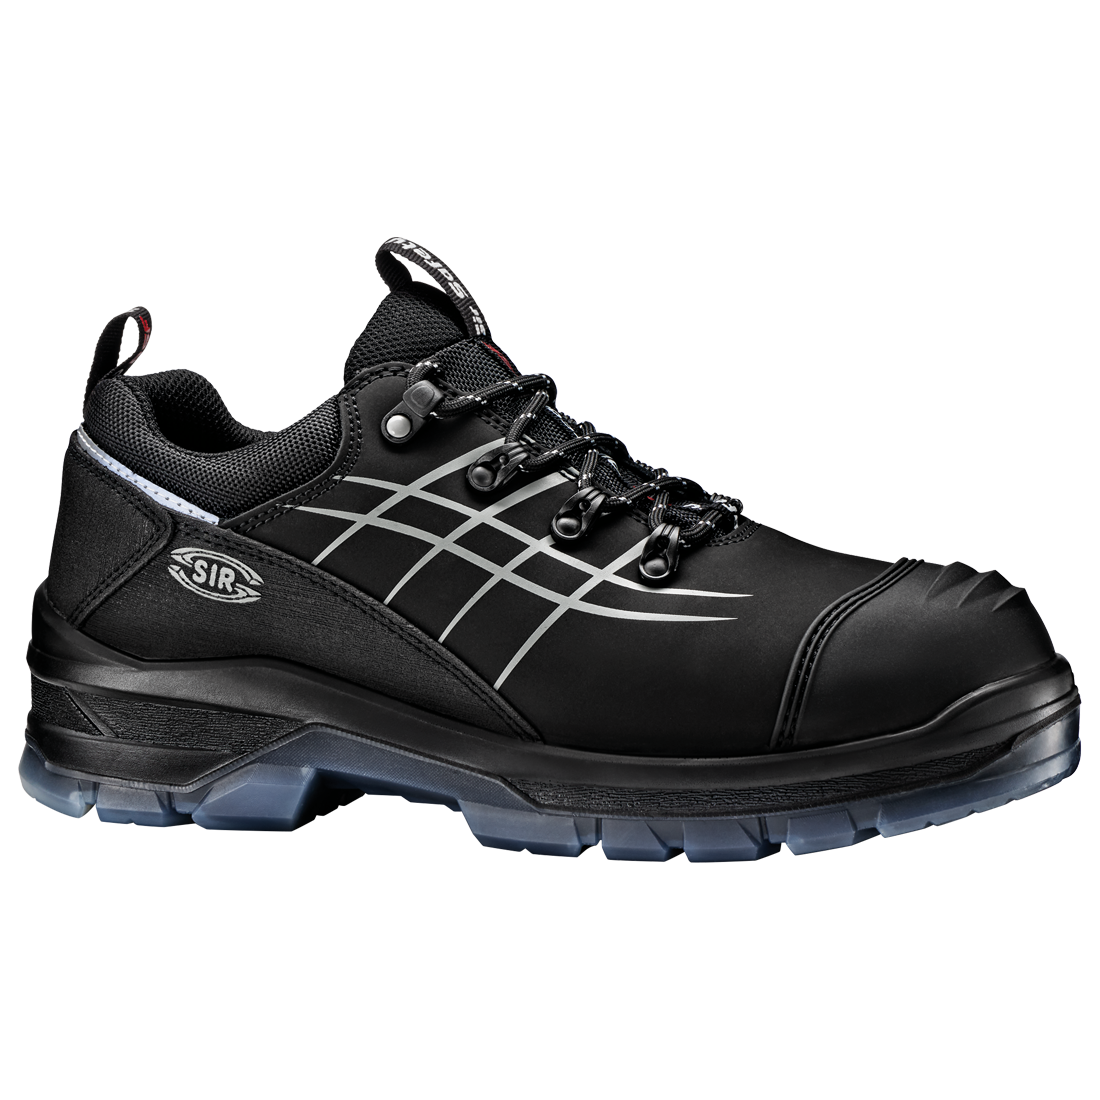 | BSF REX NEW Safety Sir System OVERCAP SHOE